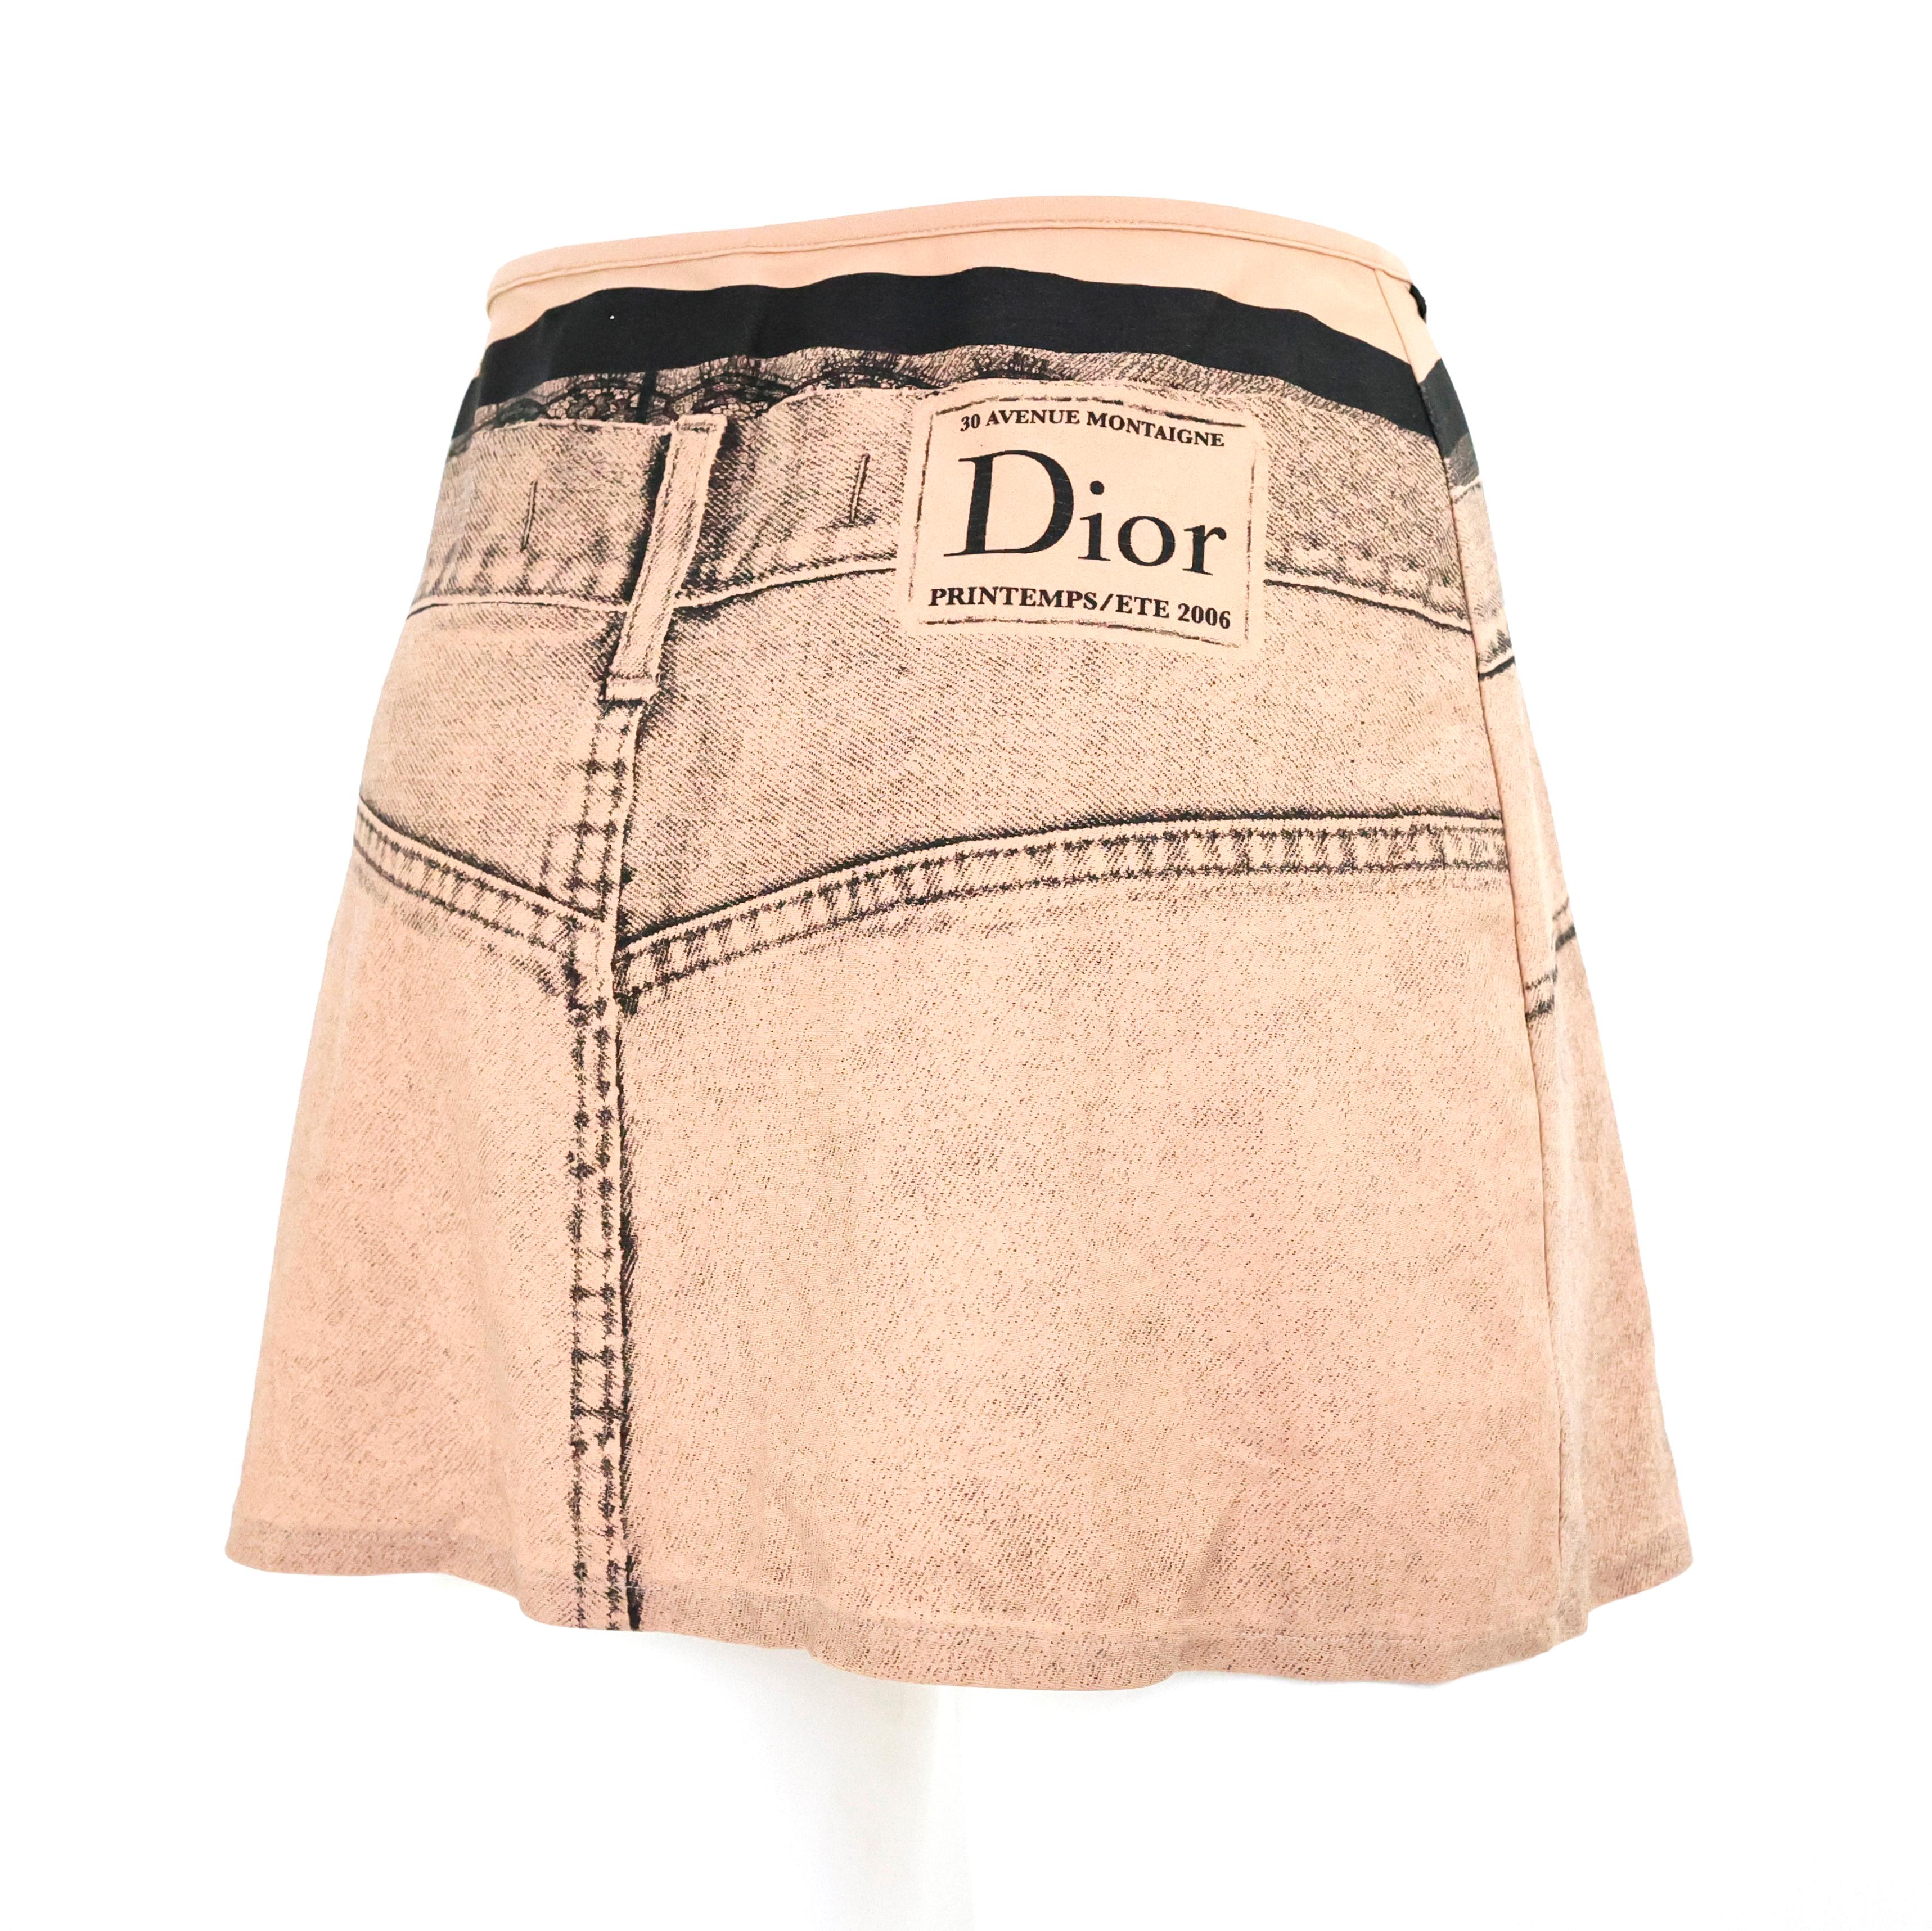 Christian Dior by John Galliano Trompe-l'oeil pareo skirt. Size 38 FR.

Condition:
Excellent.